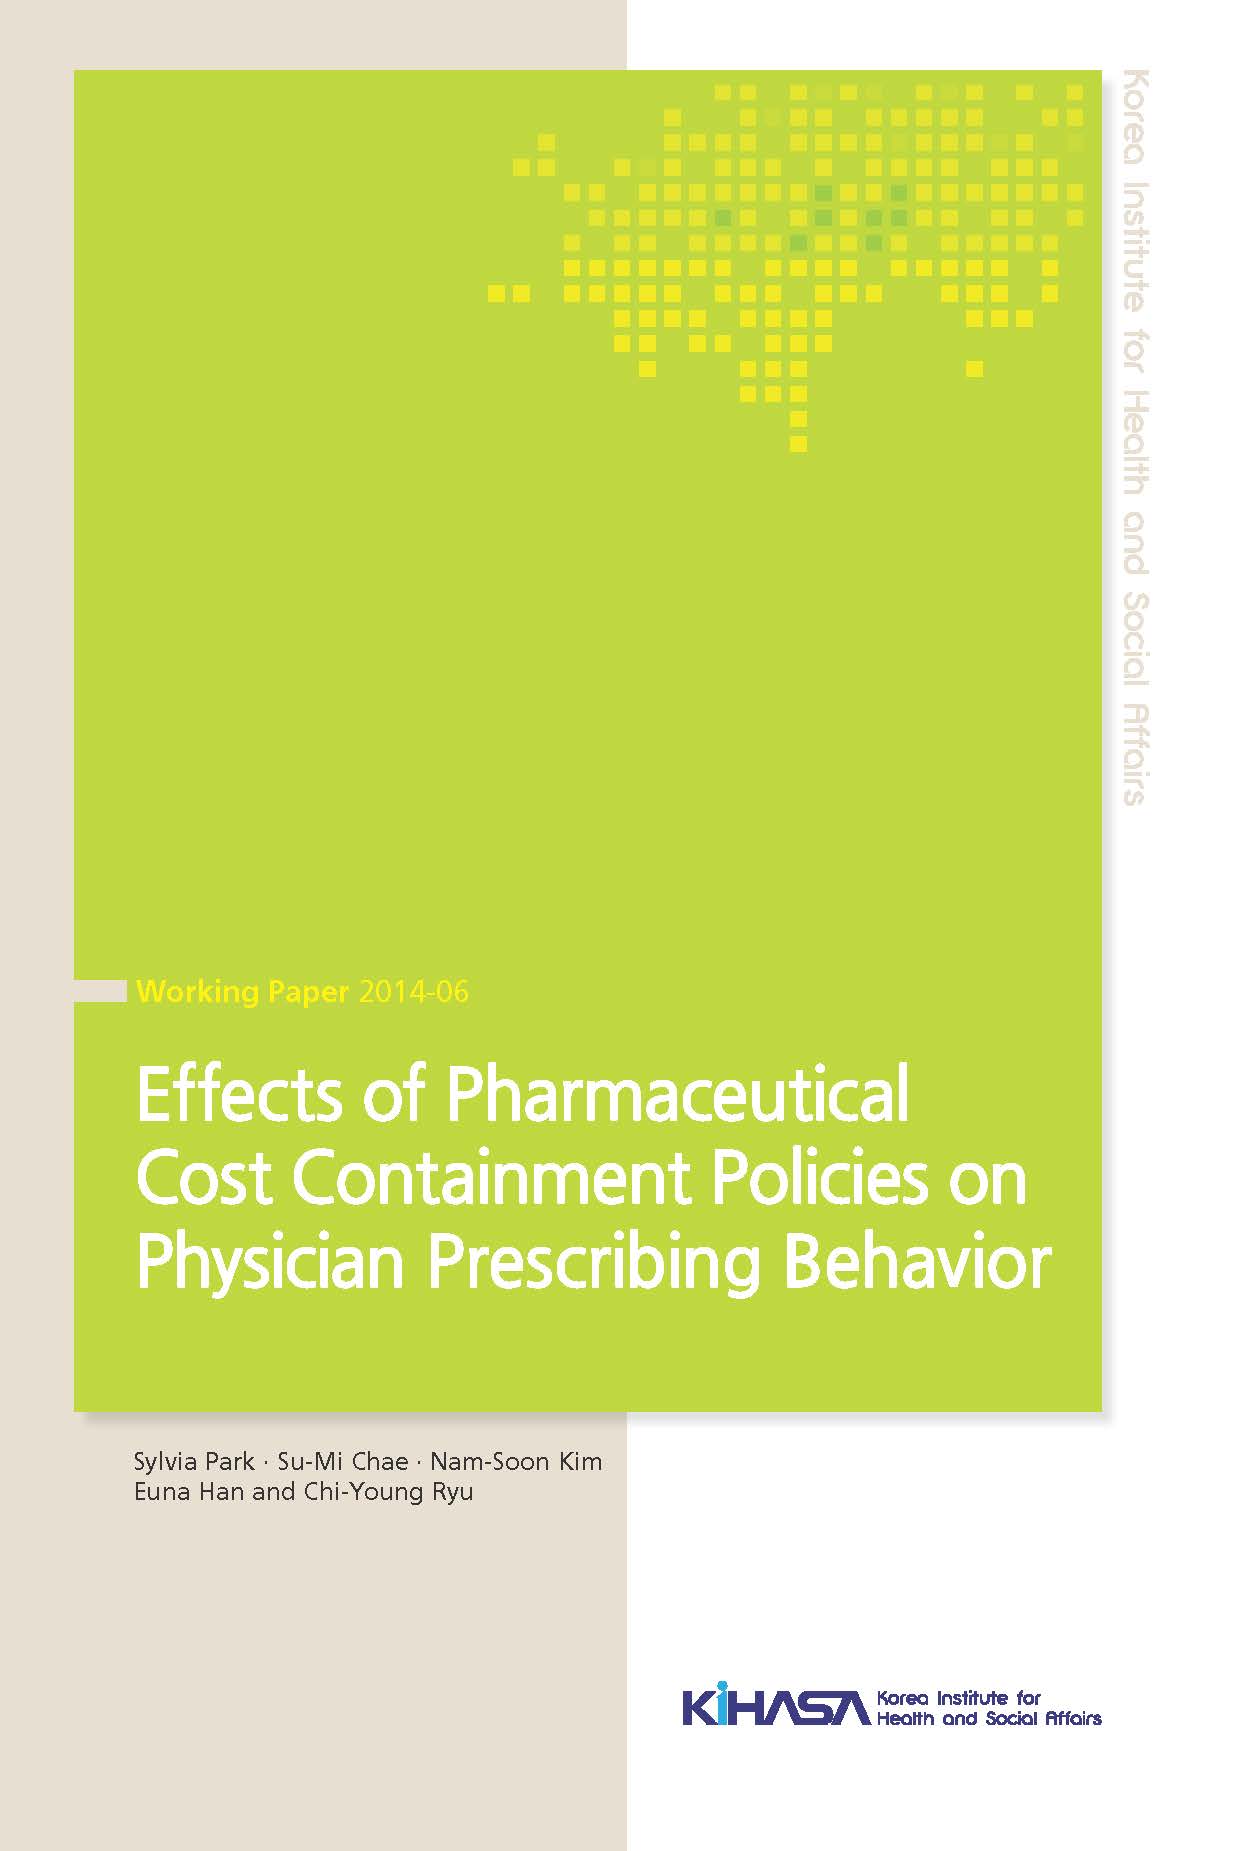 Effects of Pharmaceutical Cost Containment Policies on Physician Prescribing Behavior